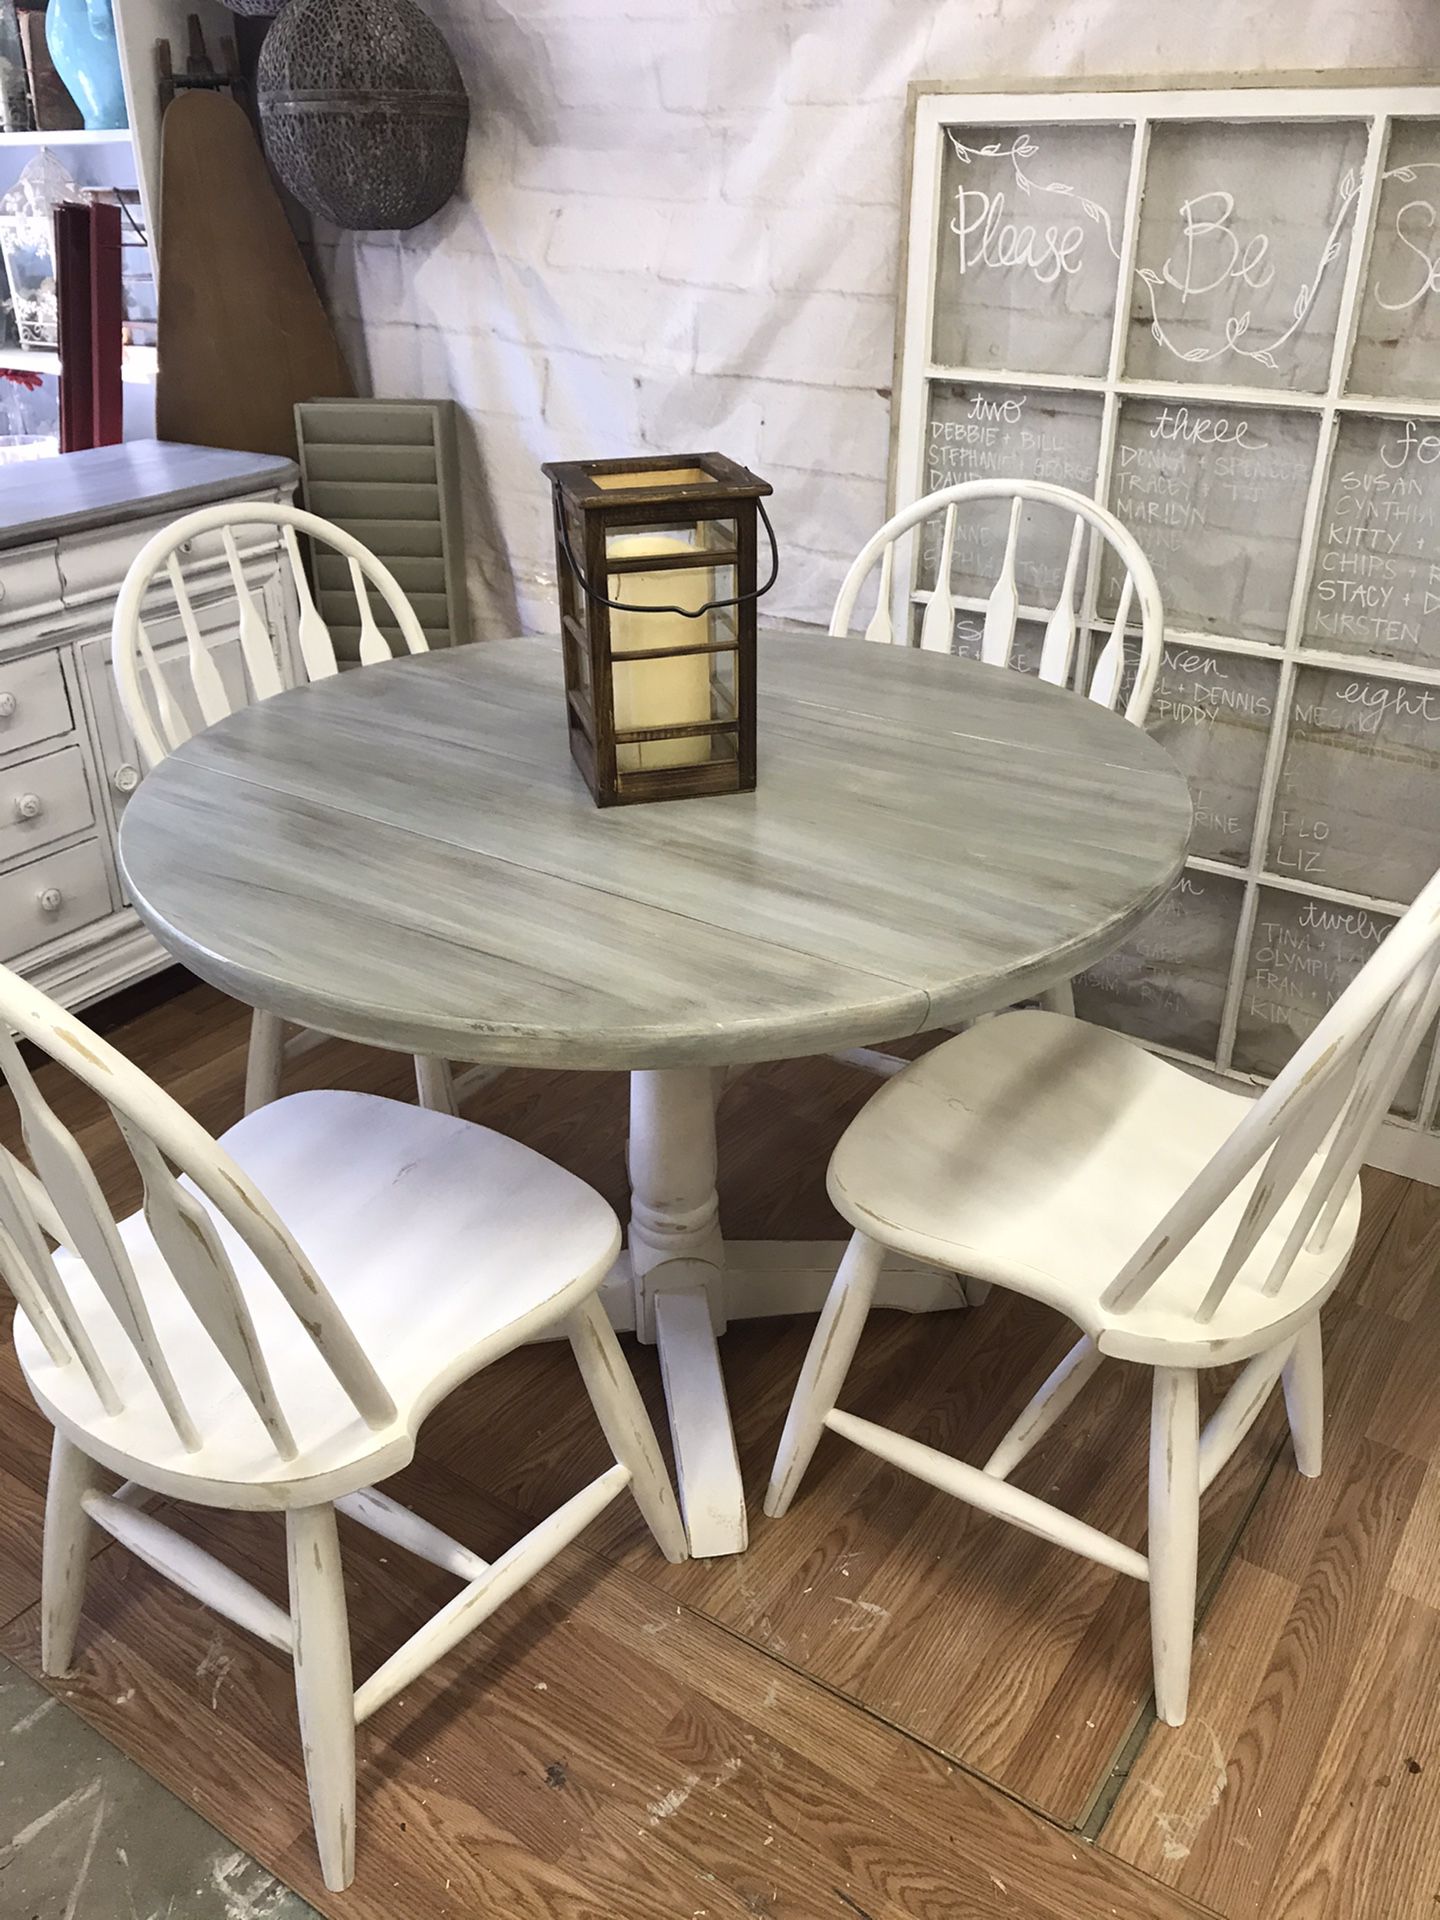 Upcycled 41 1/2” round drop leaf table & 4 chairs